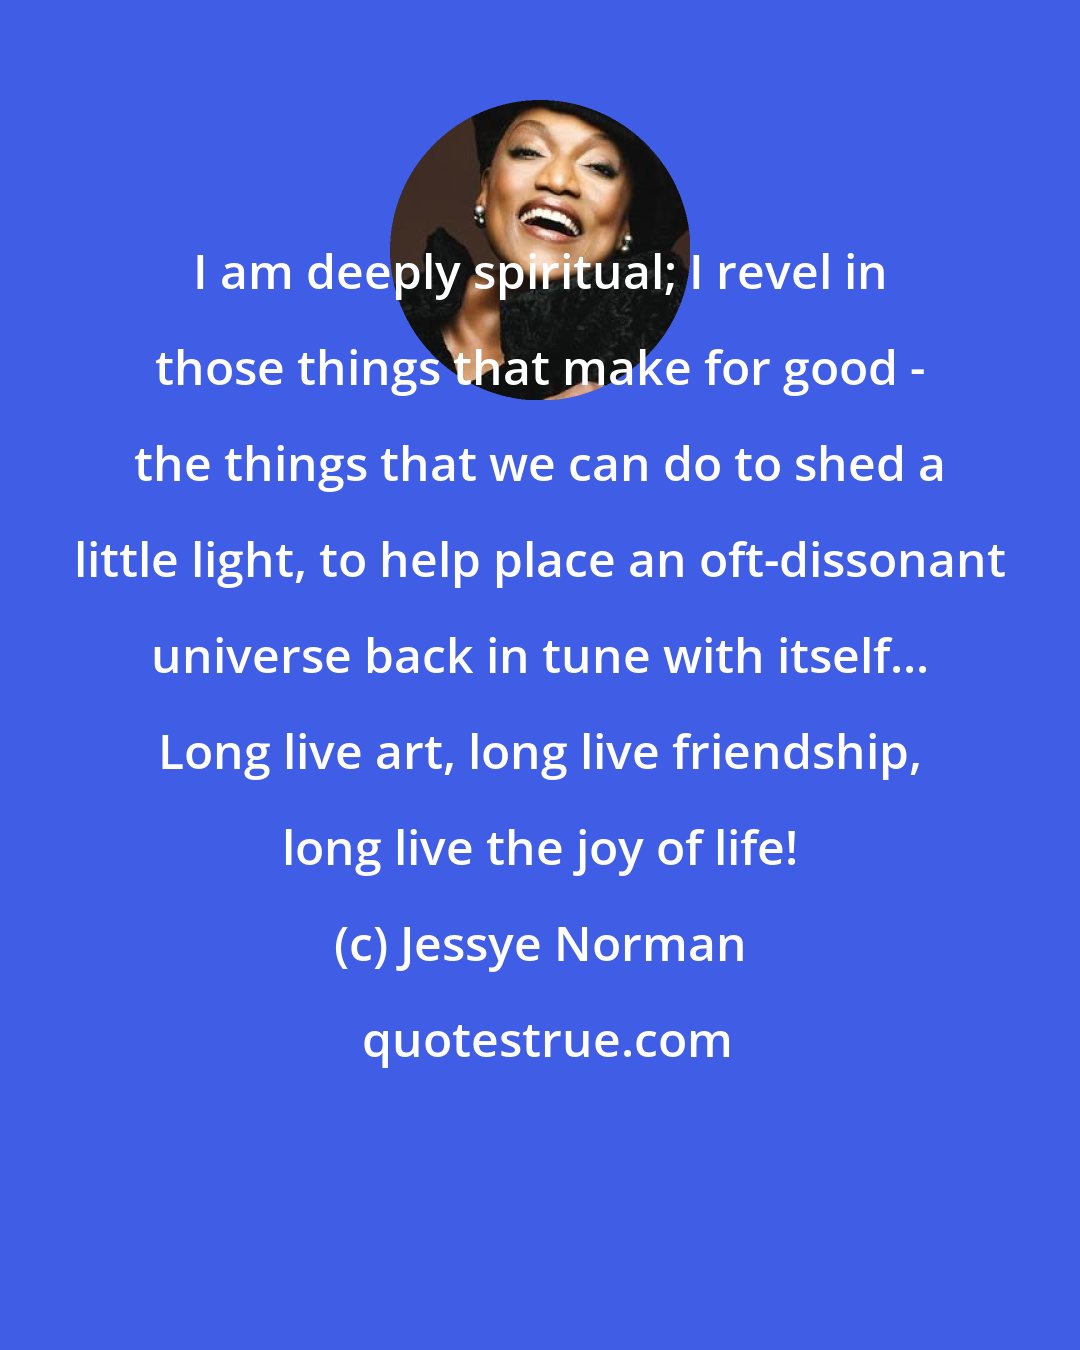 Jessye Norman: I am deeply spiritual; I revel in those things that make for good - the things that we can do to shed a little light, to help place an oft-dissonant universe back in tune with itself... Long live art, long live friendship, long live the joy of life!